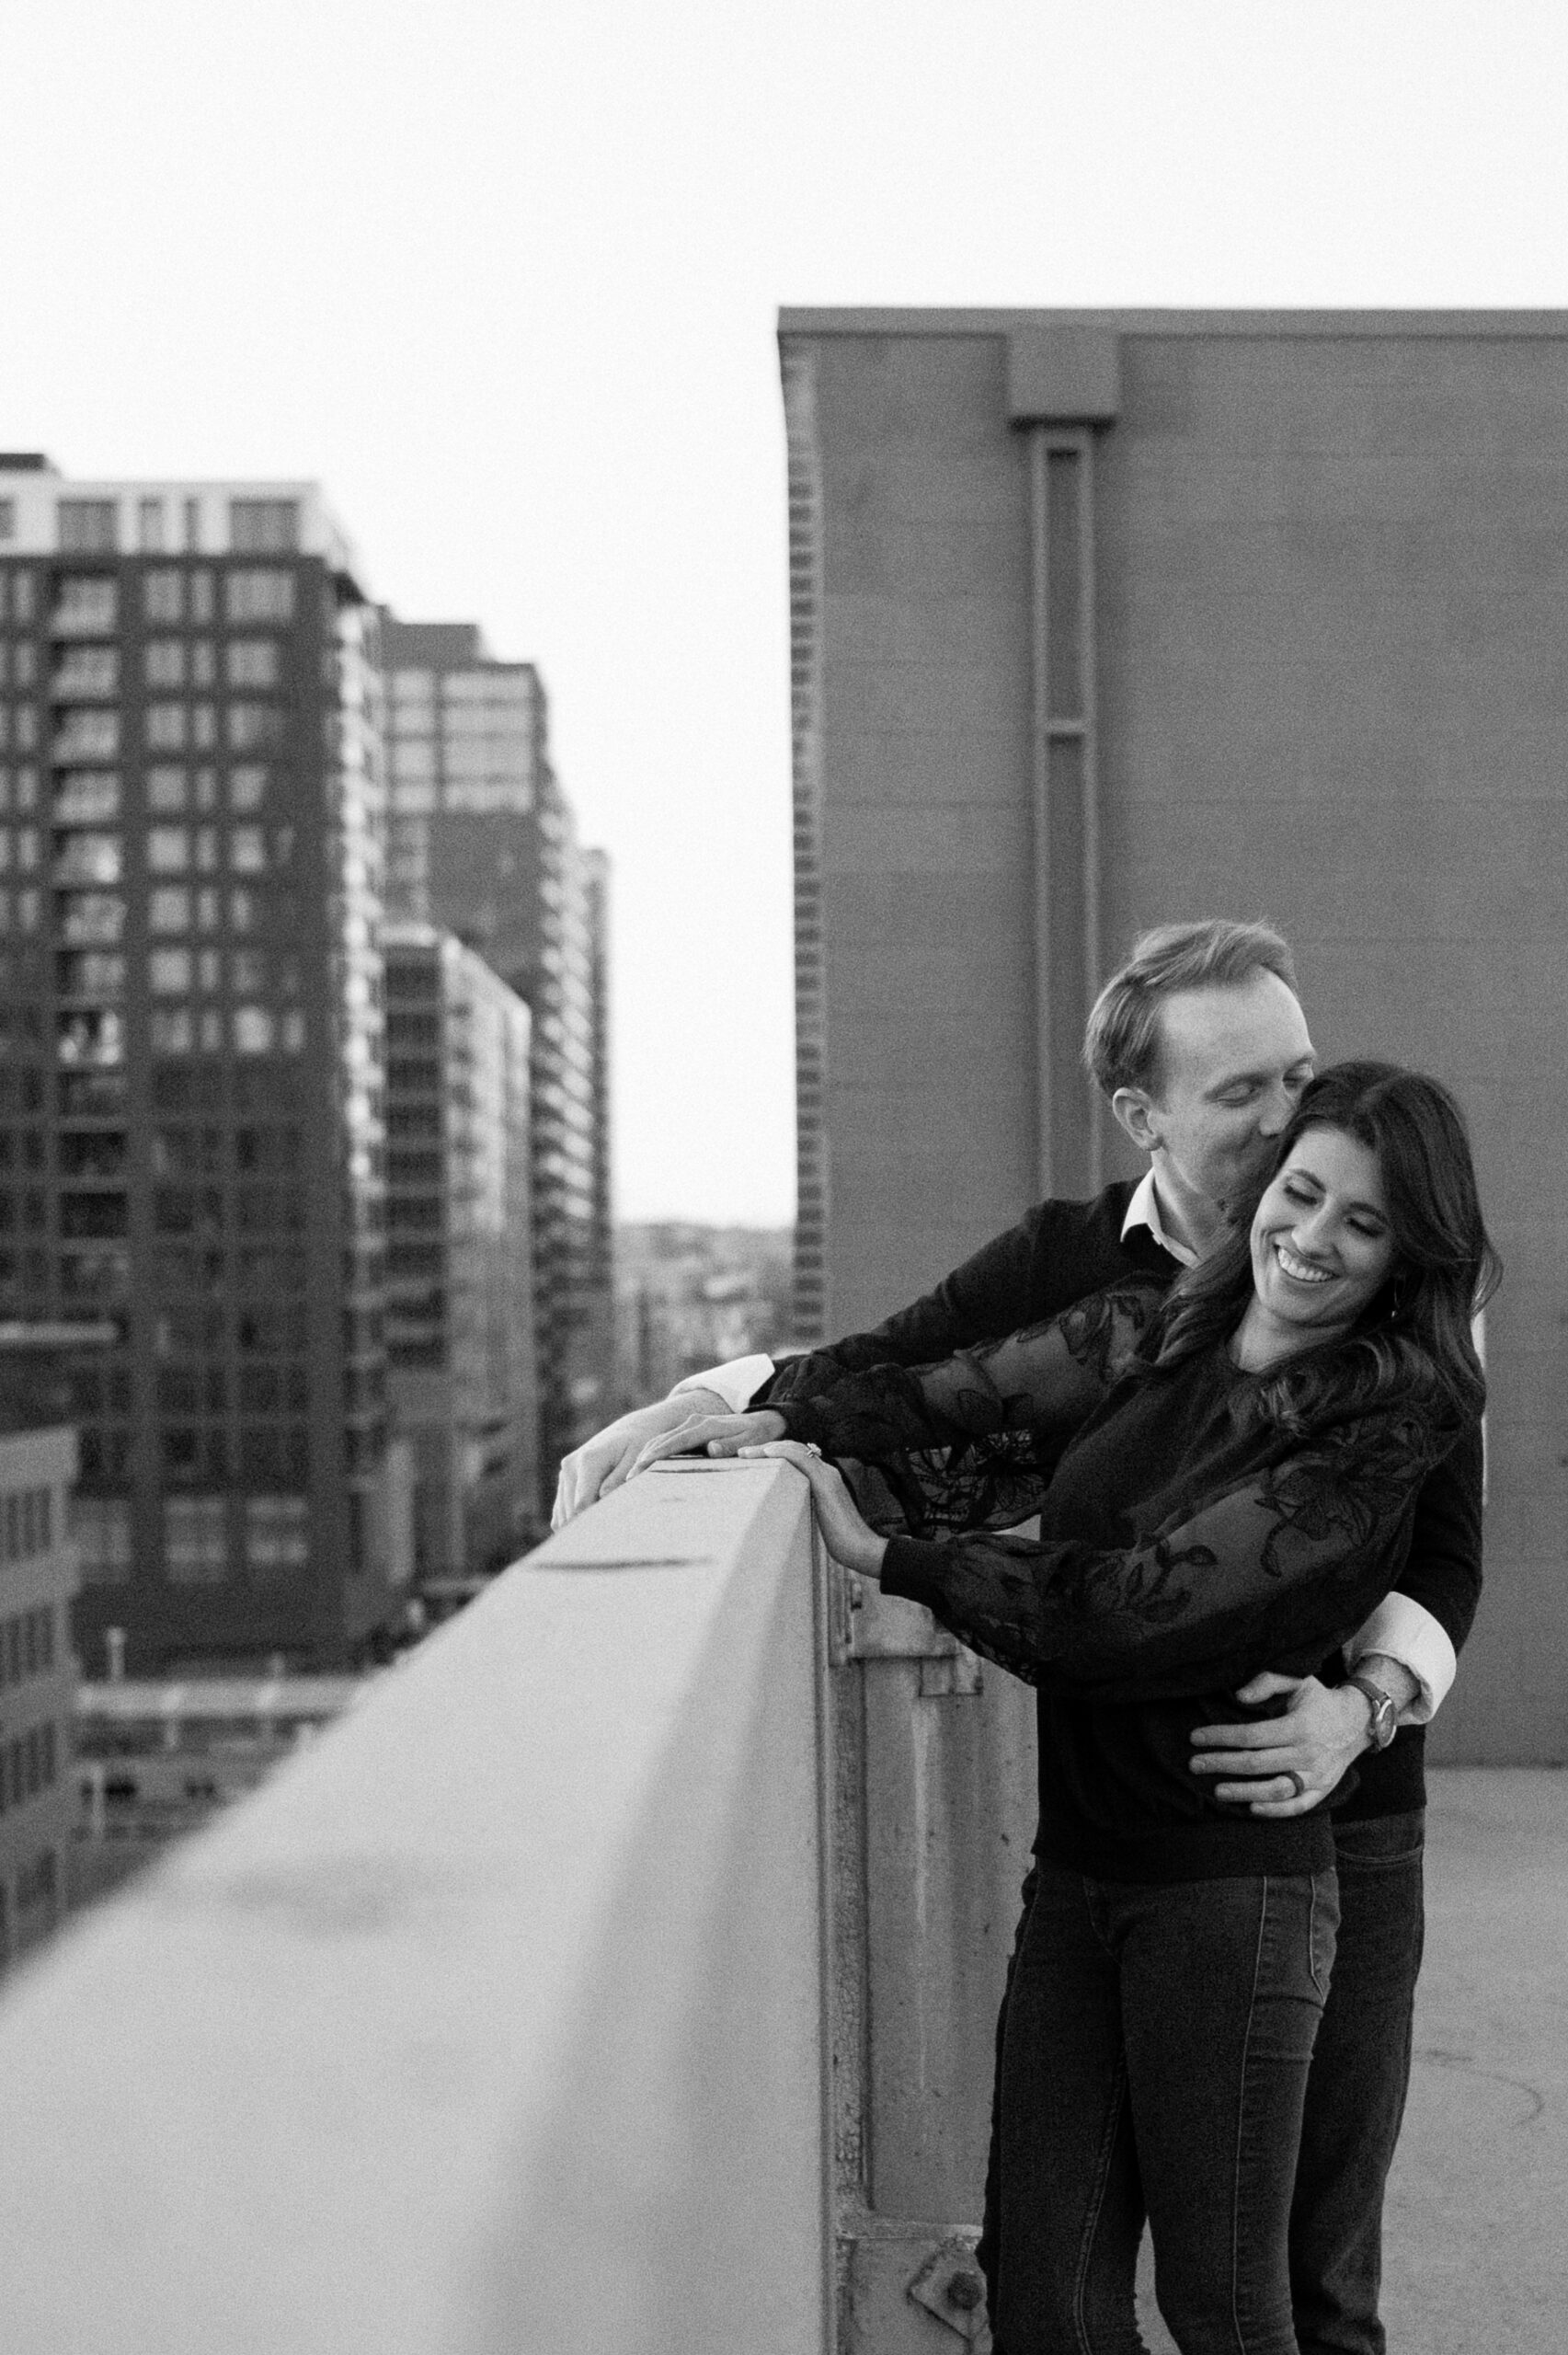 A romantic downtown Denver engagement session that took place on top of a parking garage, inside the elegant bar Poka Lola, and inside the historic Union Station. Photos by Colorado wedding photographer Ashley Joyce.